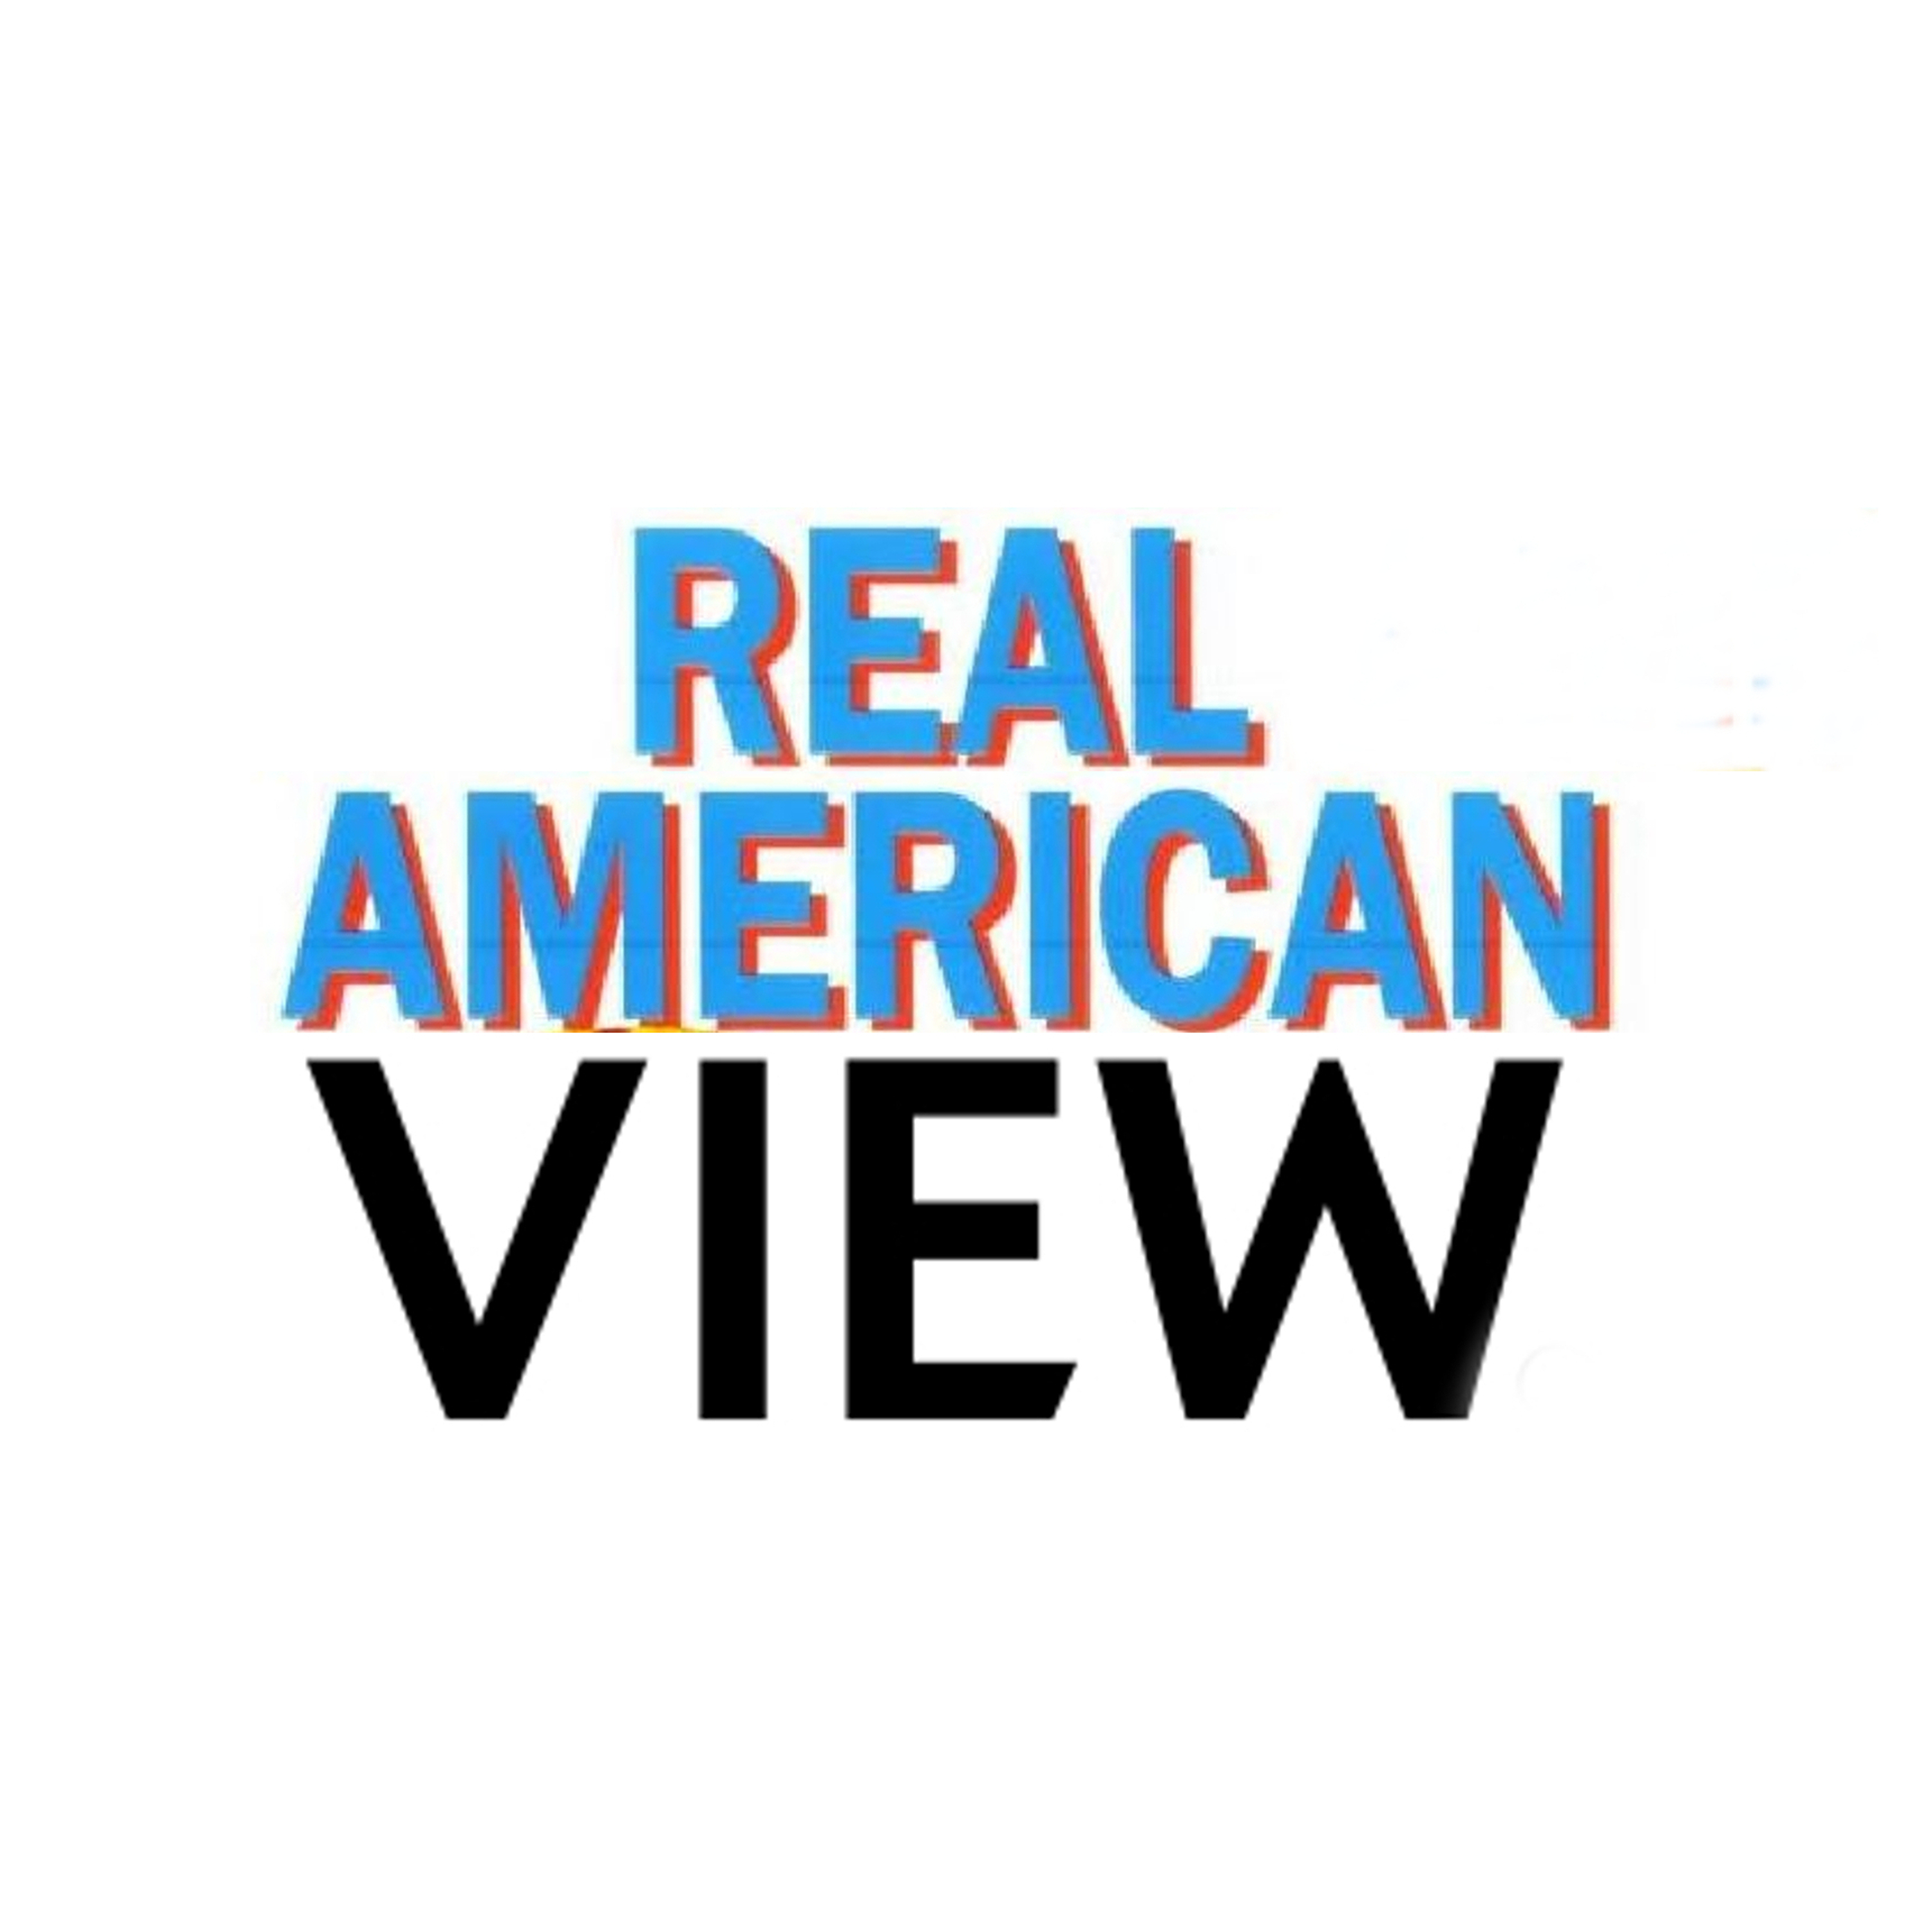 REAL AMERICAN VIEW